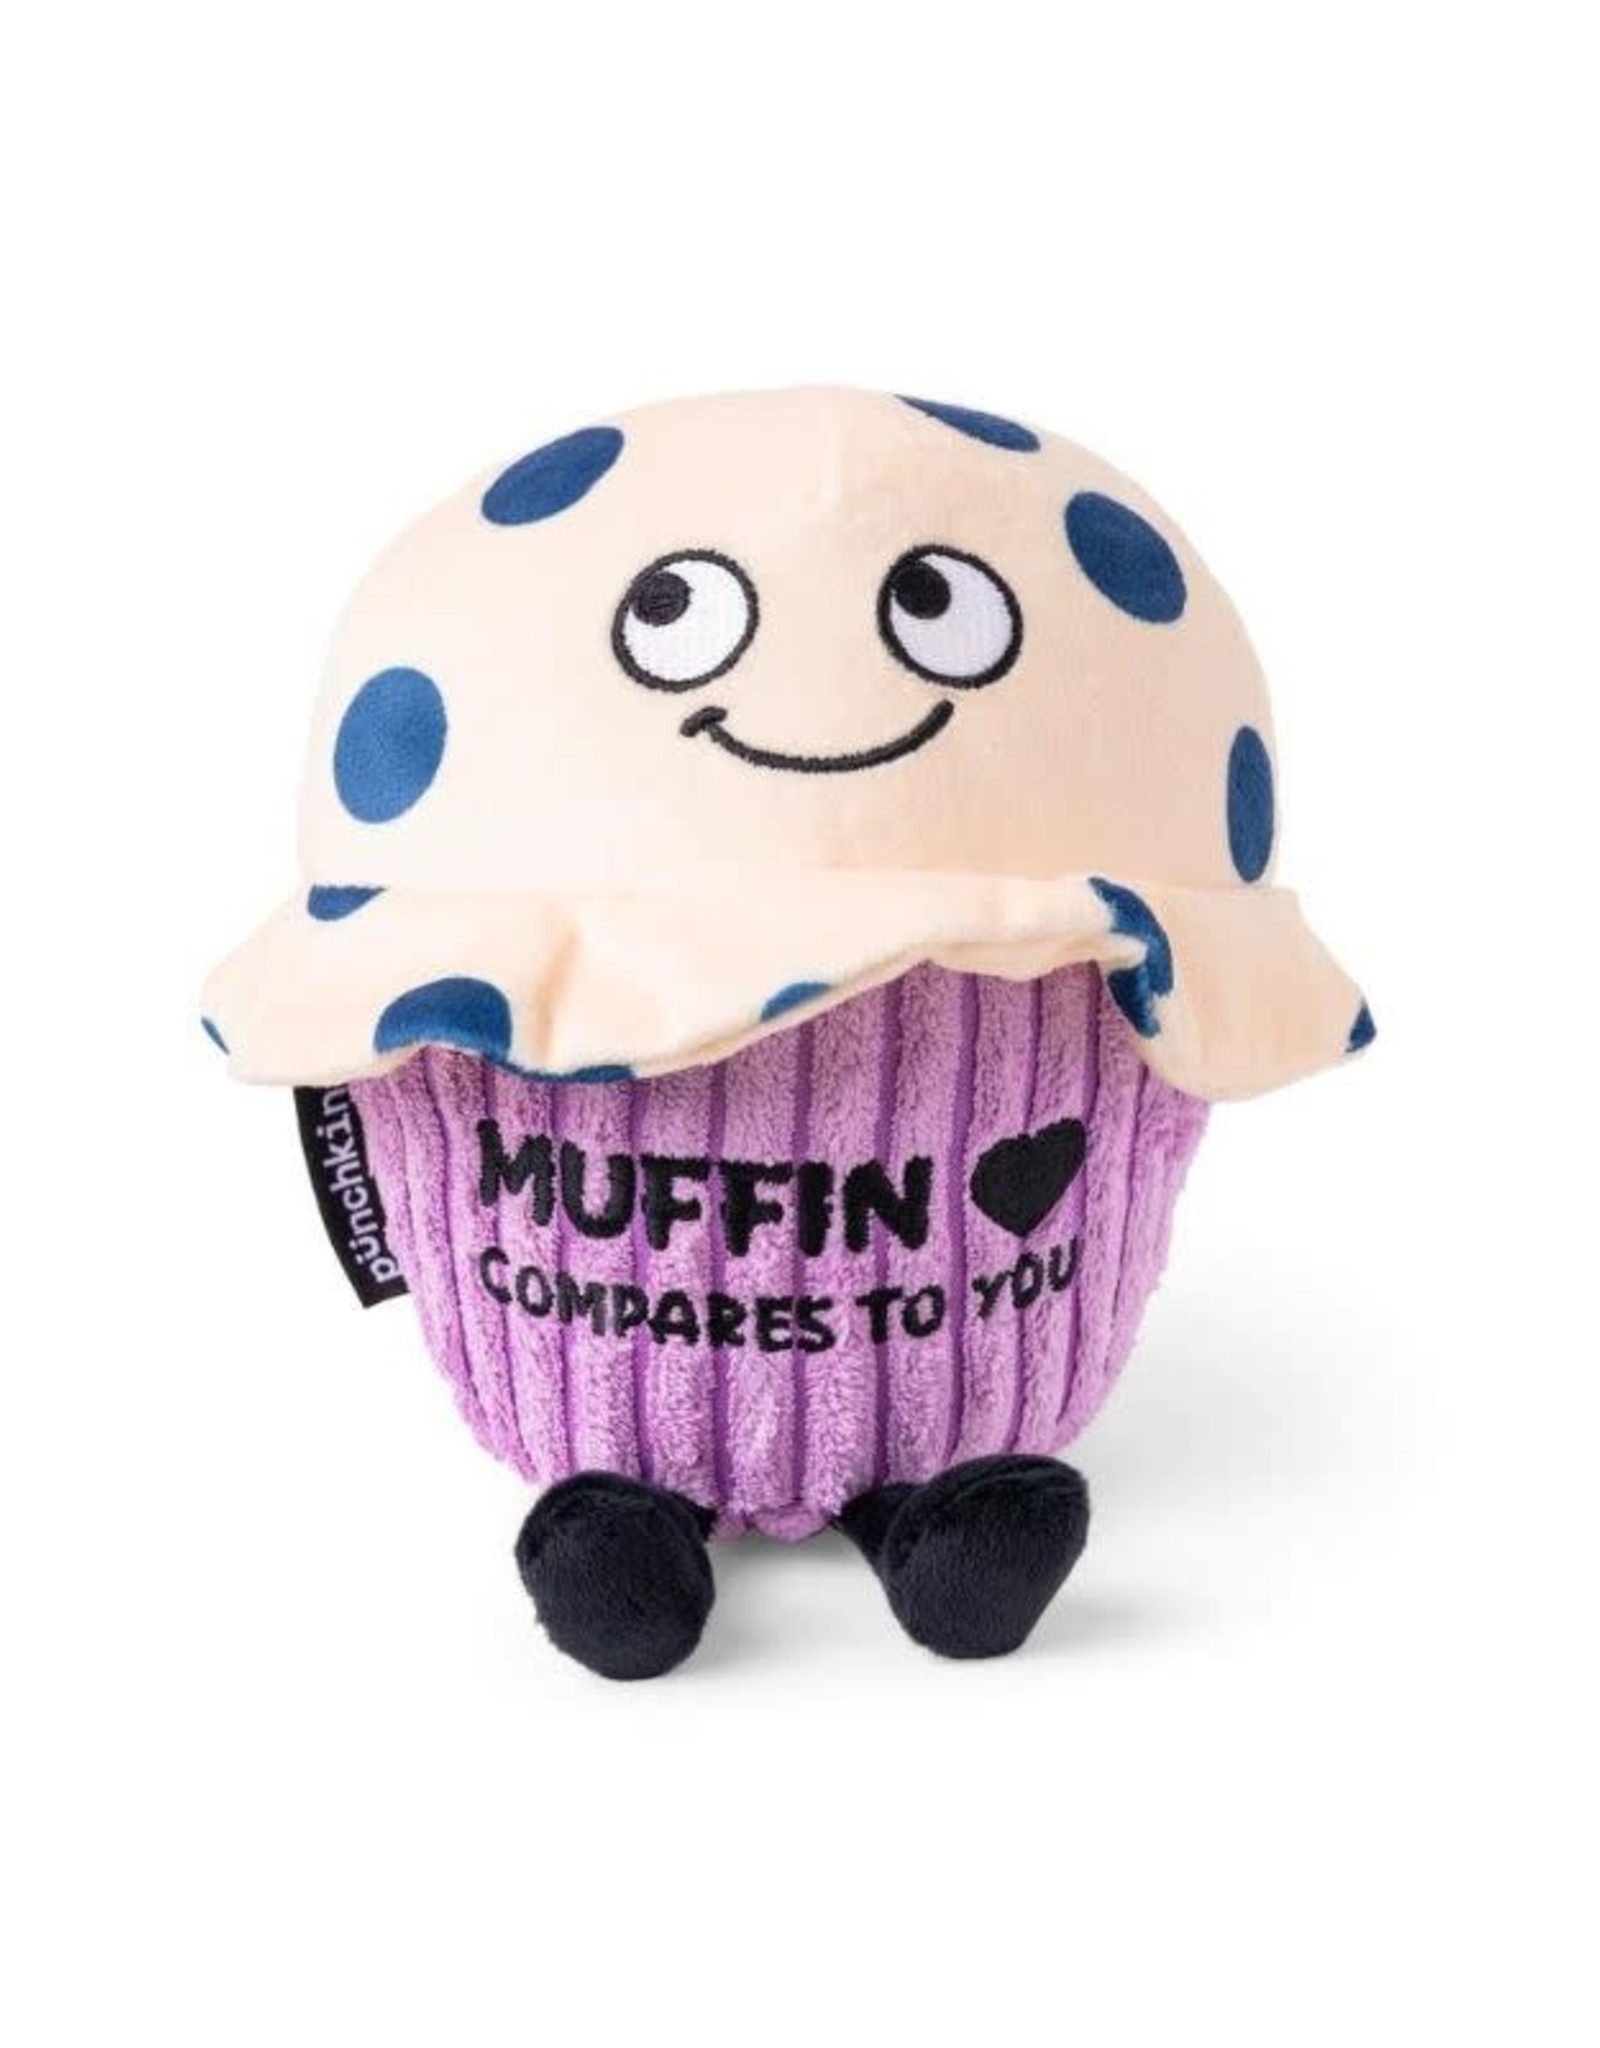 Punchkins Muffin - Compares To You